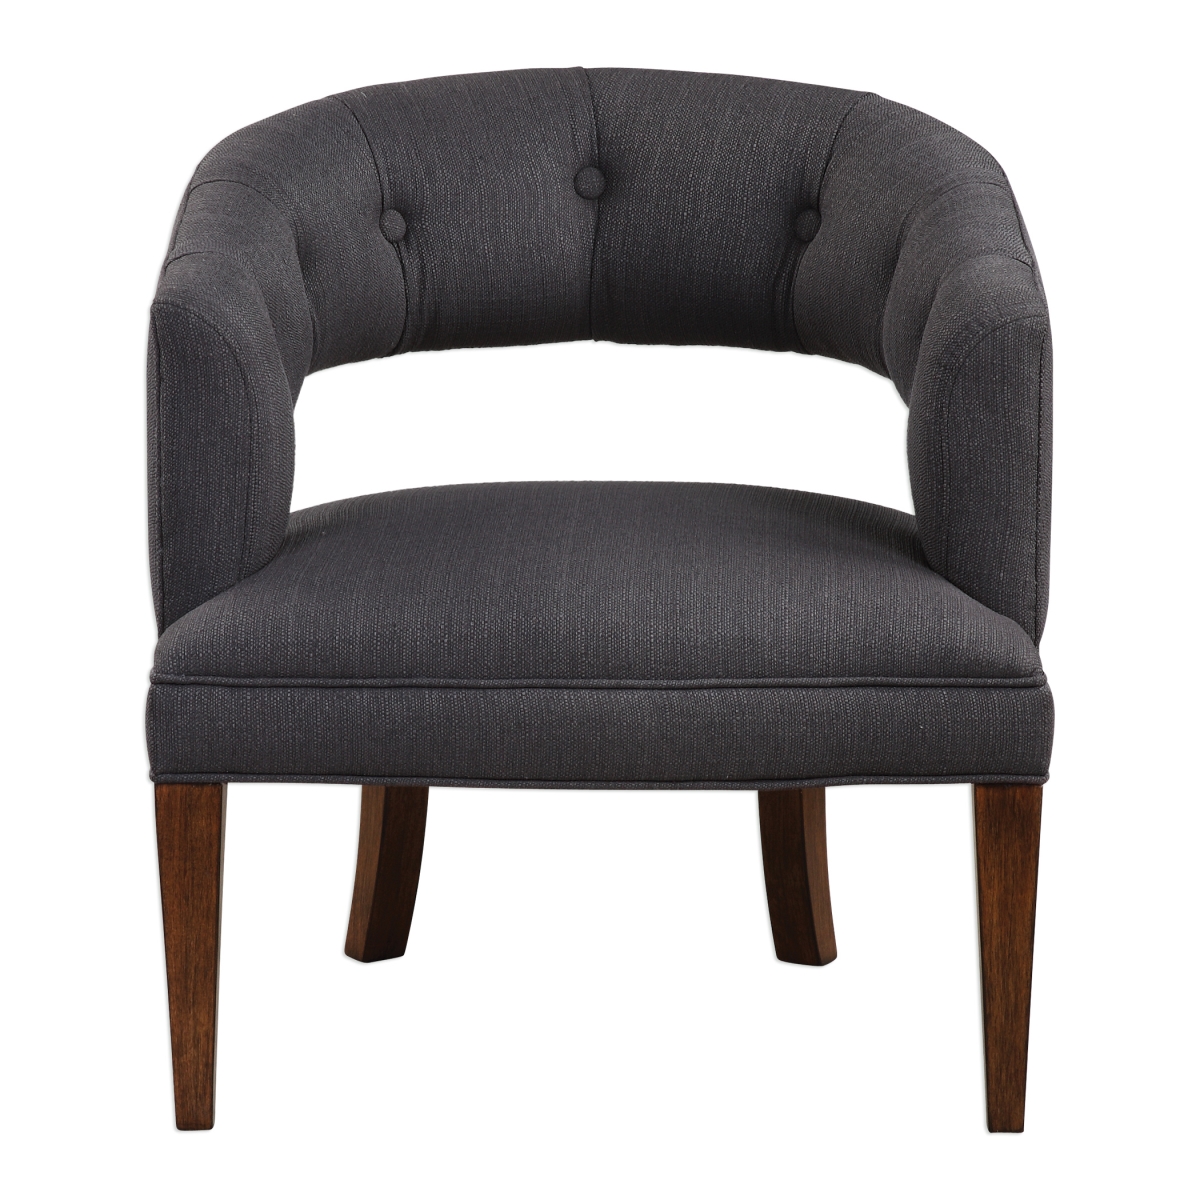 UPC 792977234082 product image for Uttermost 23408 Ridley Charcoal Linen Accent Chair | upcitemdb.com